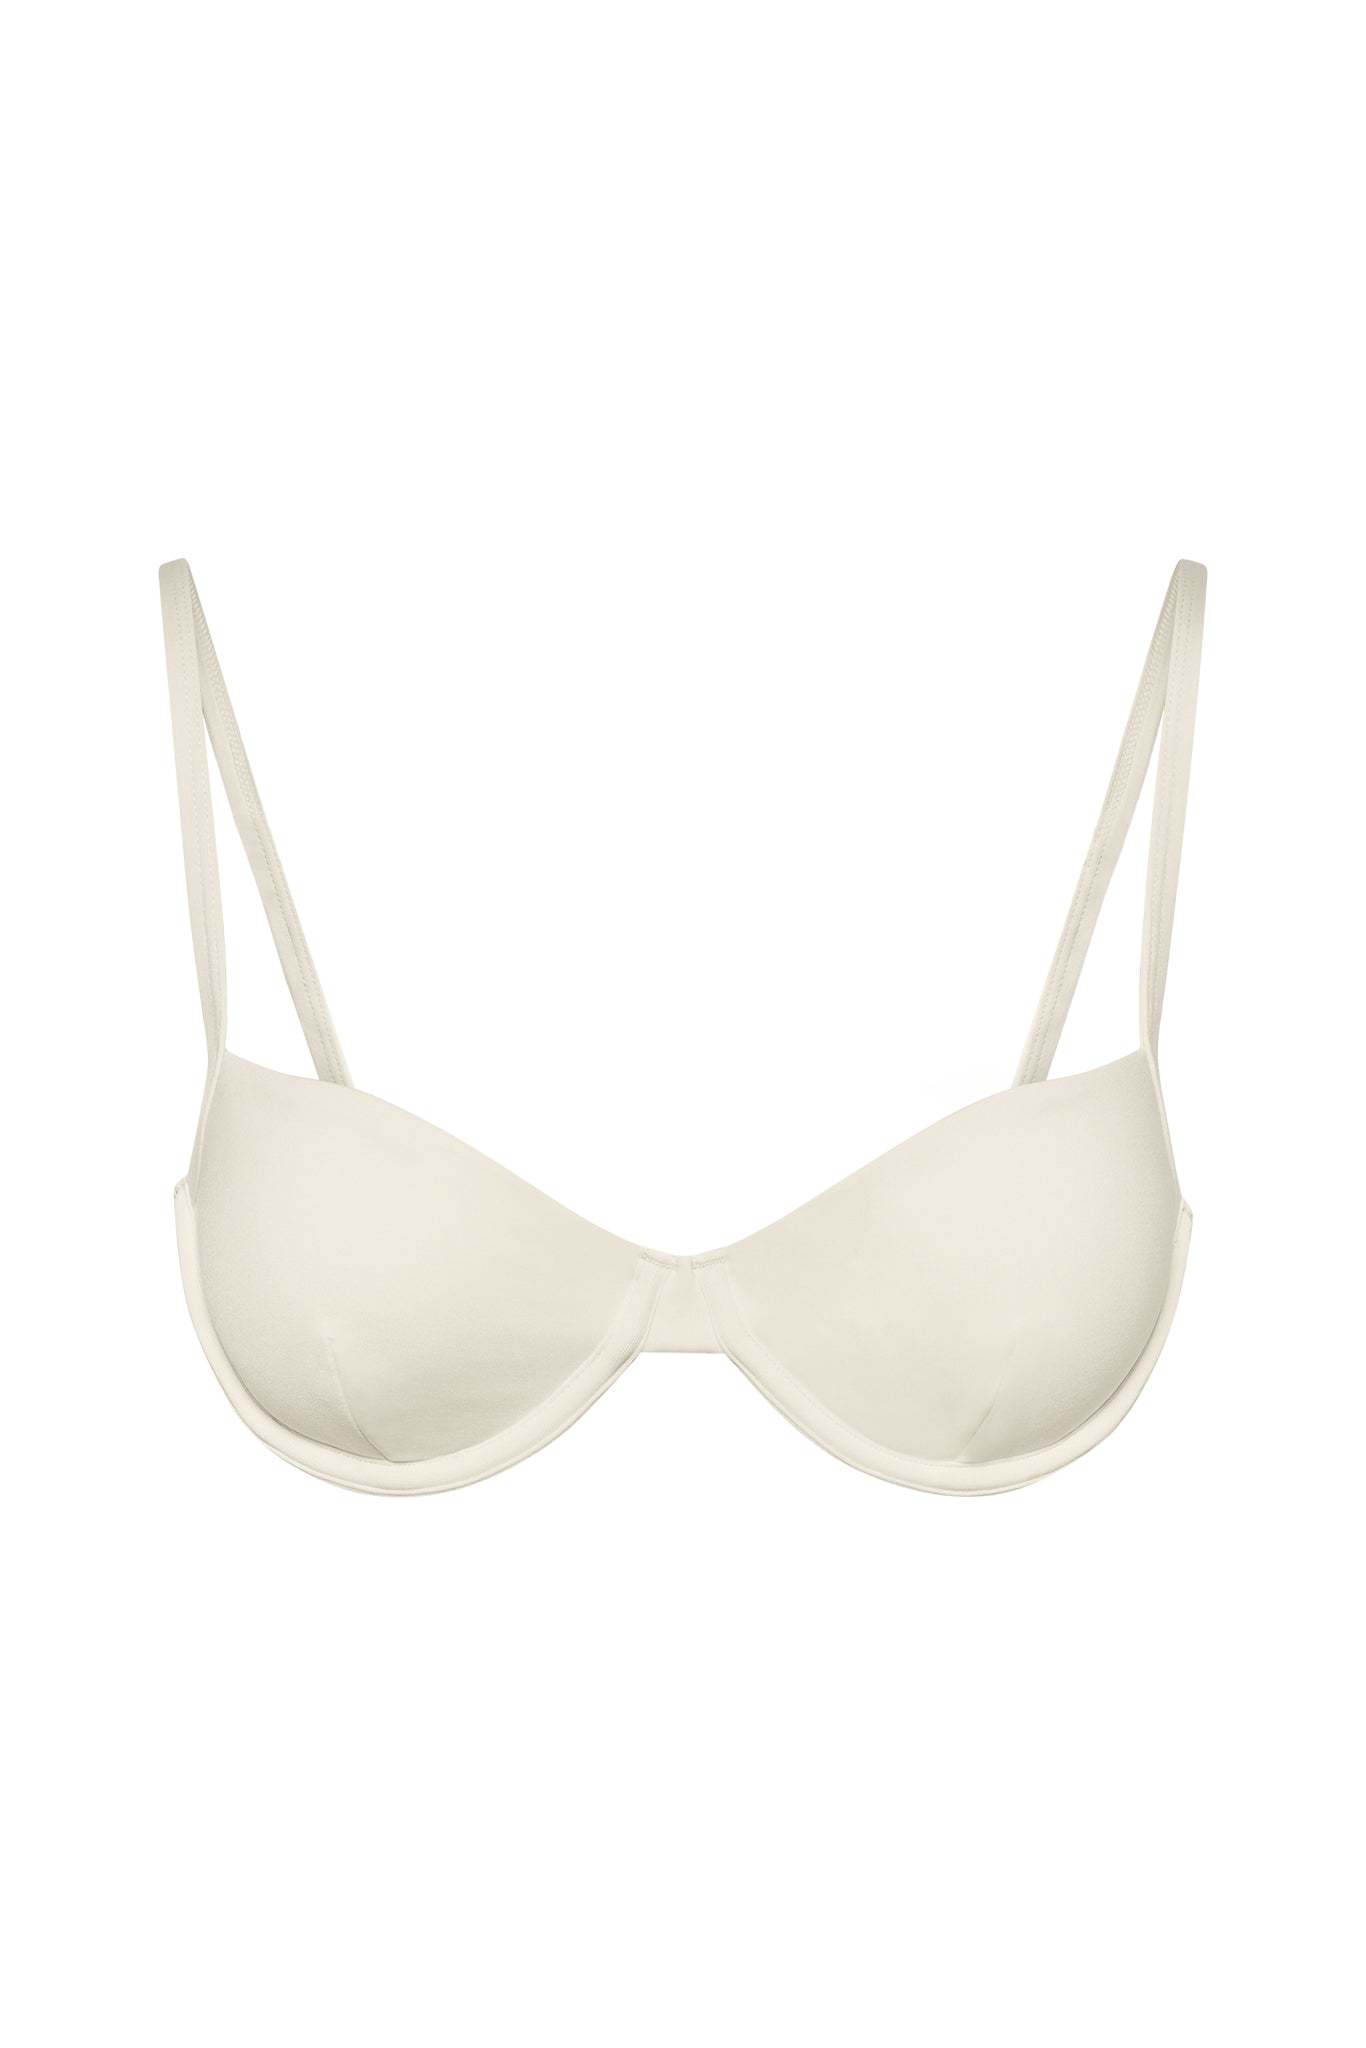 This is apparently the average cup size of New Zealand women's bra size!